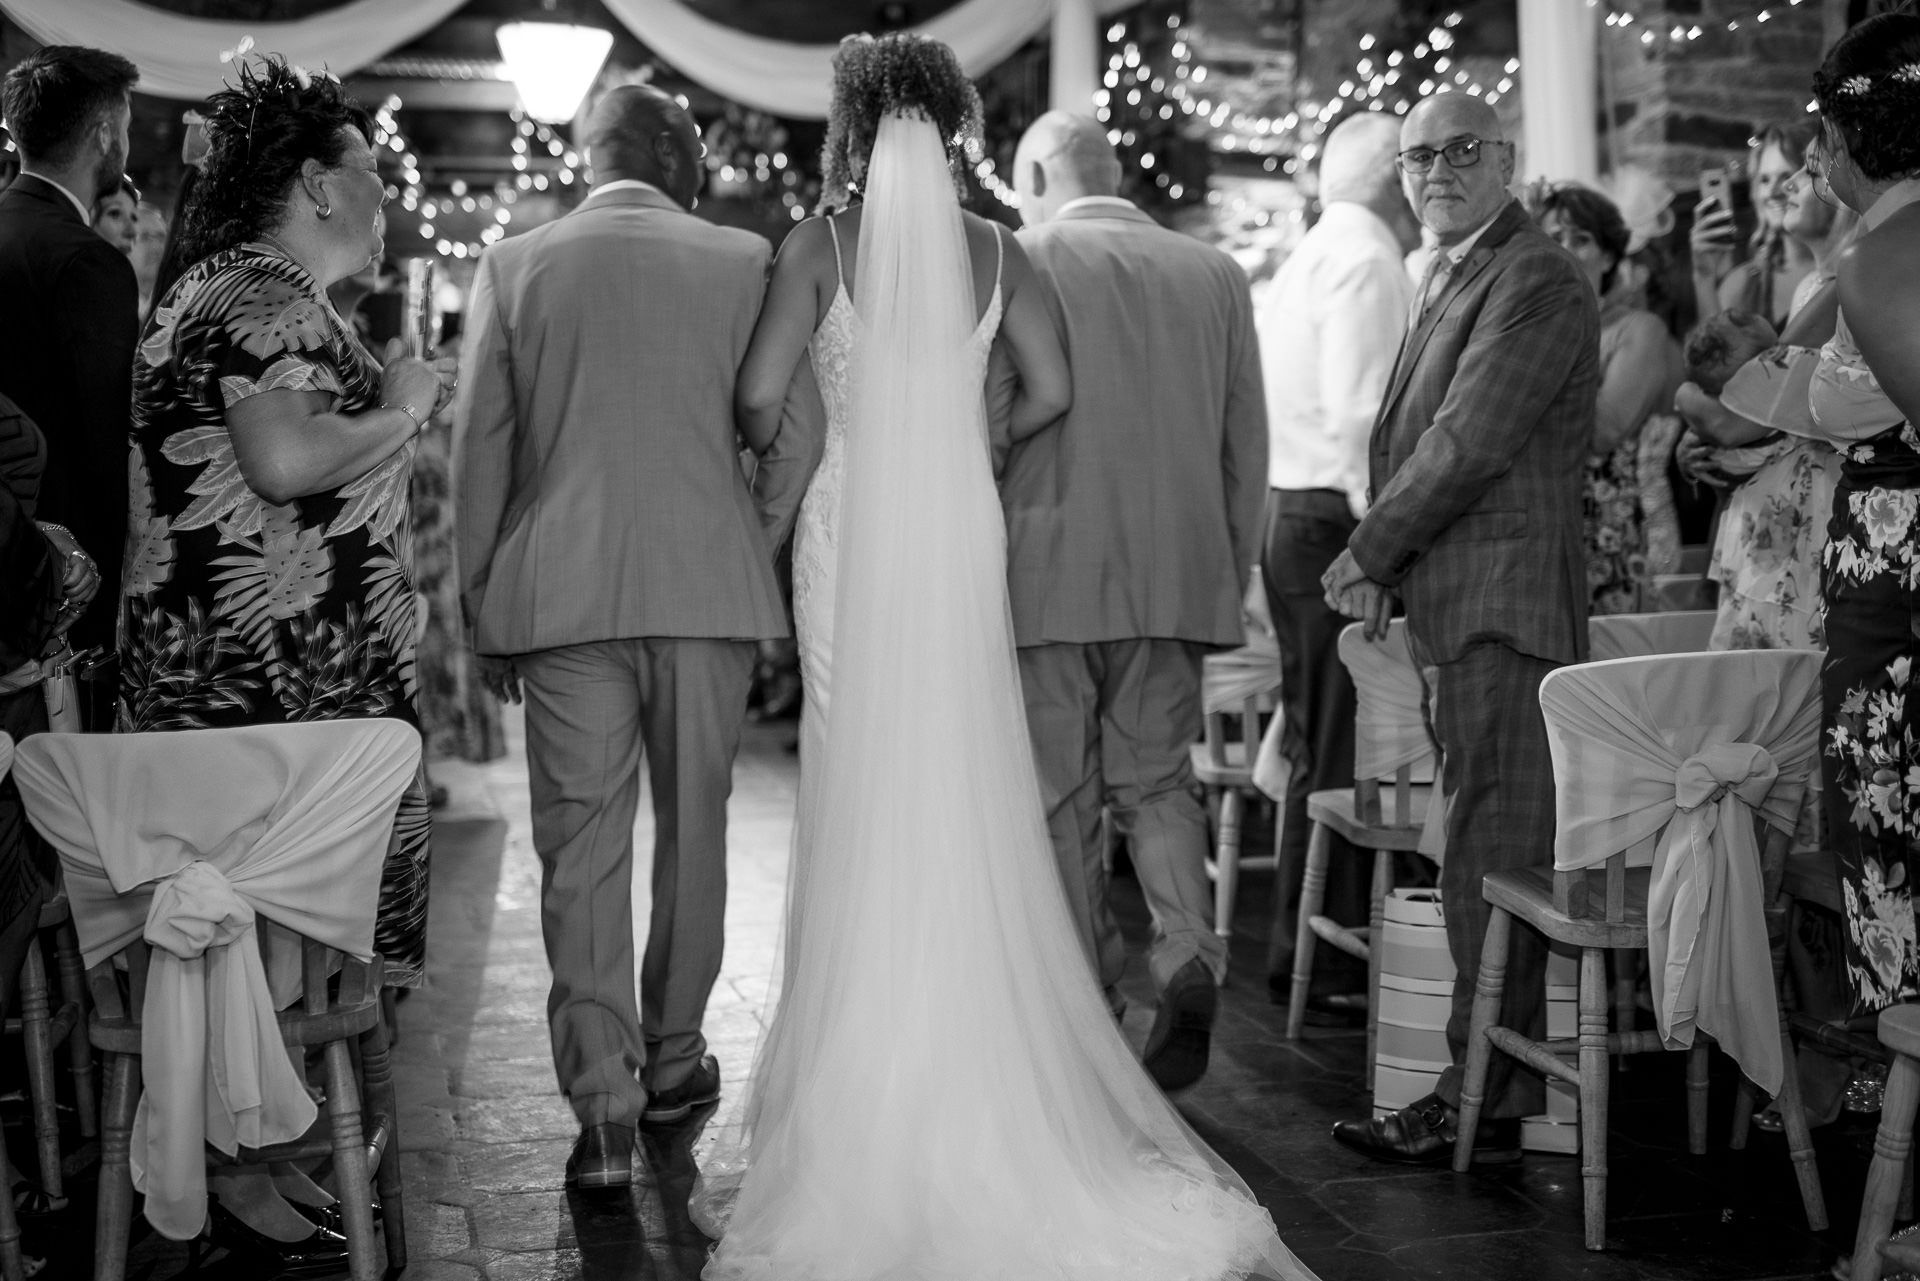 the bride is led down the aisle by her father and step father